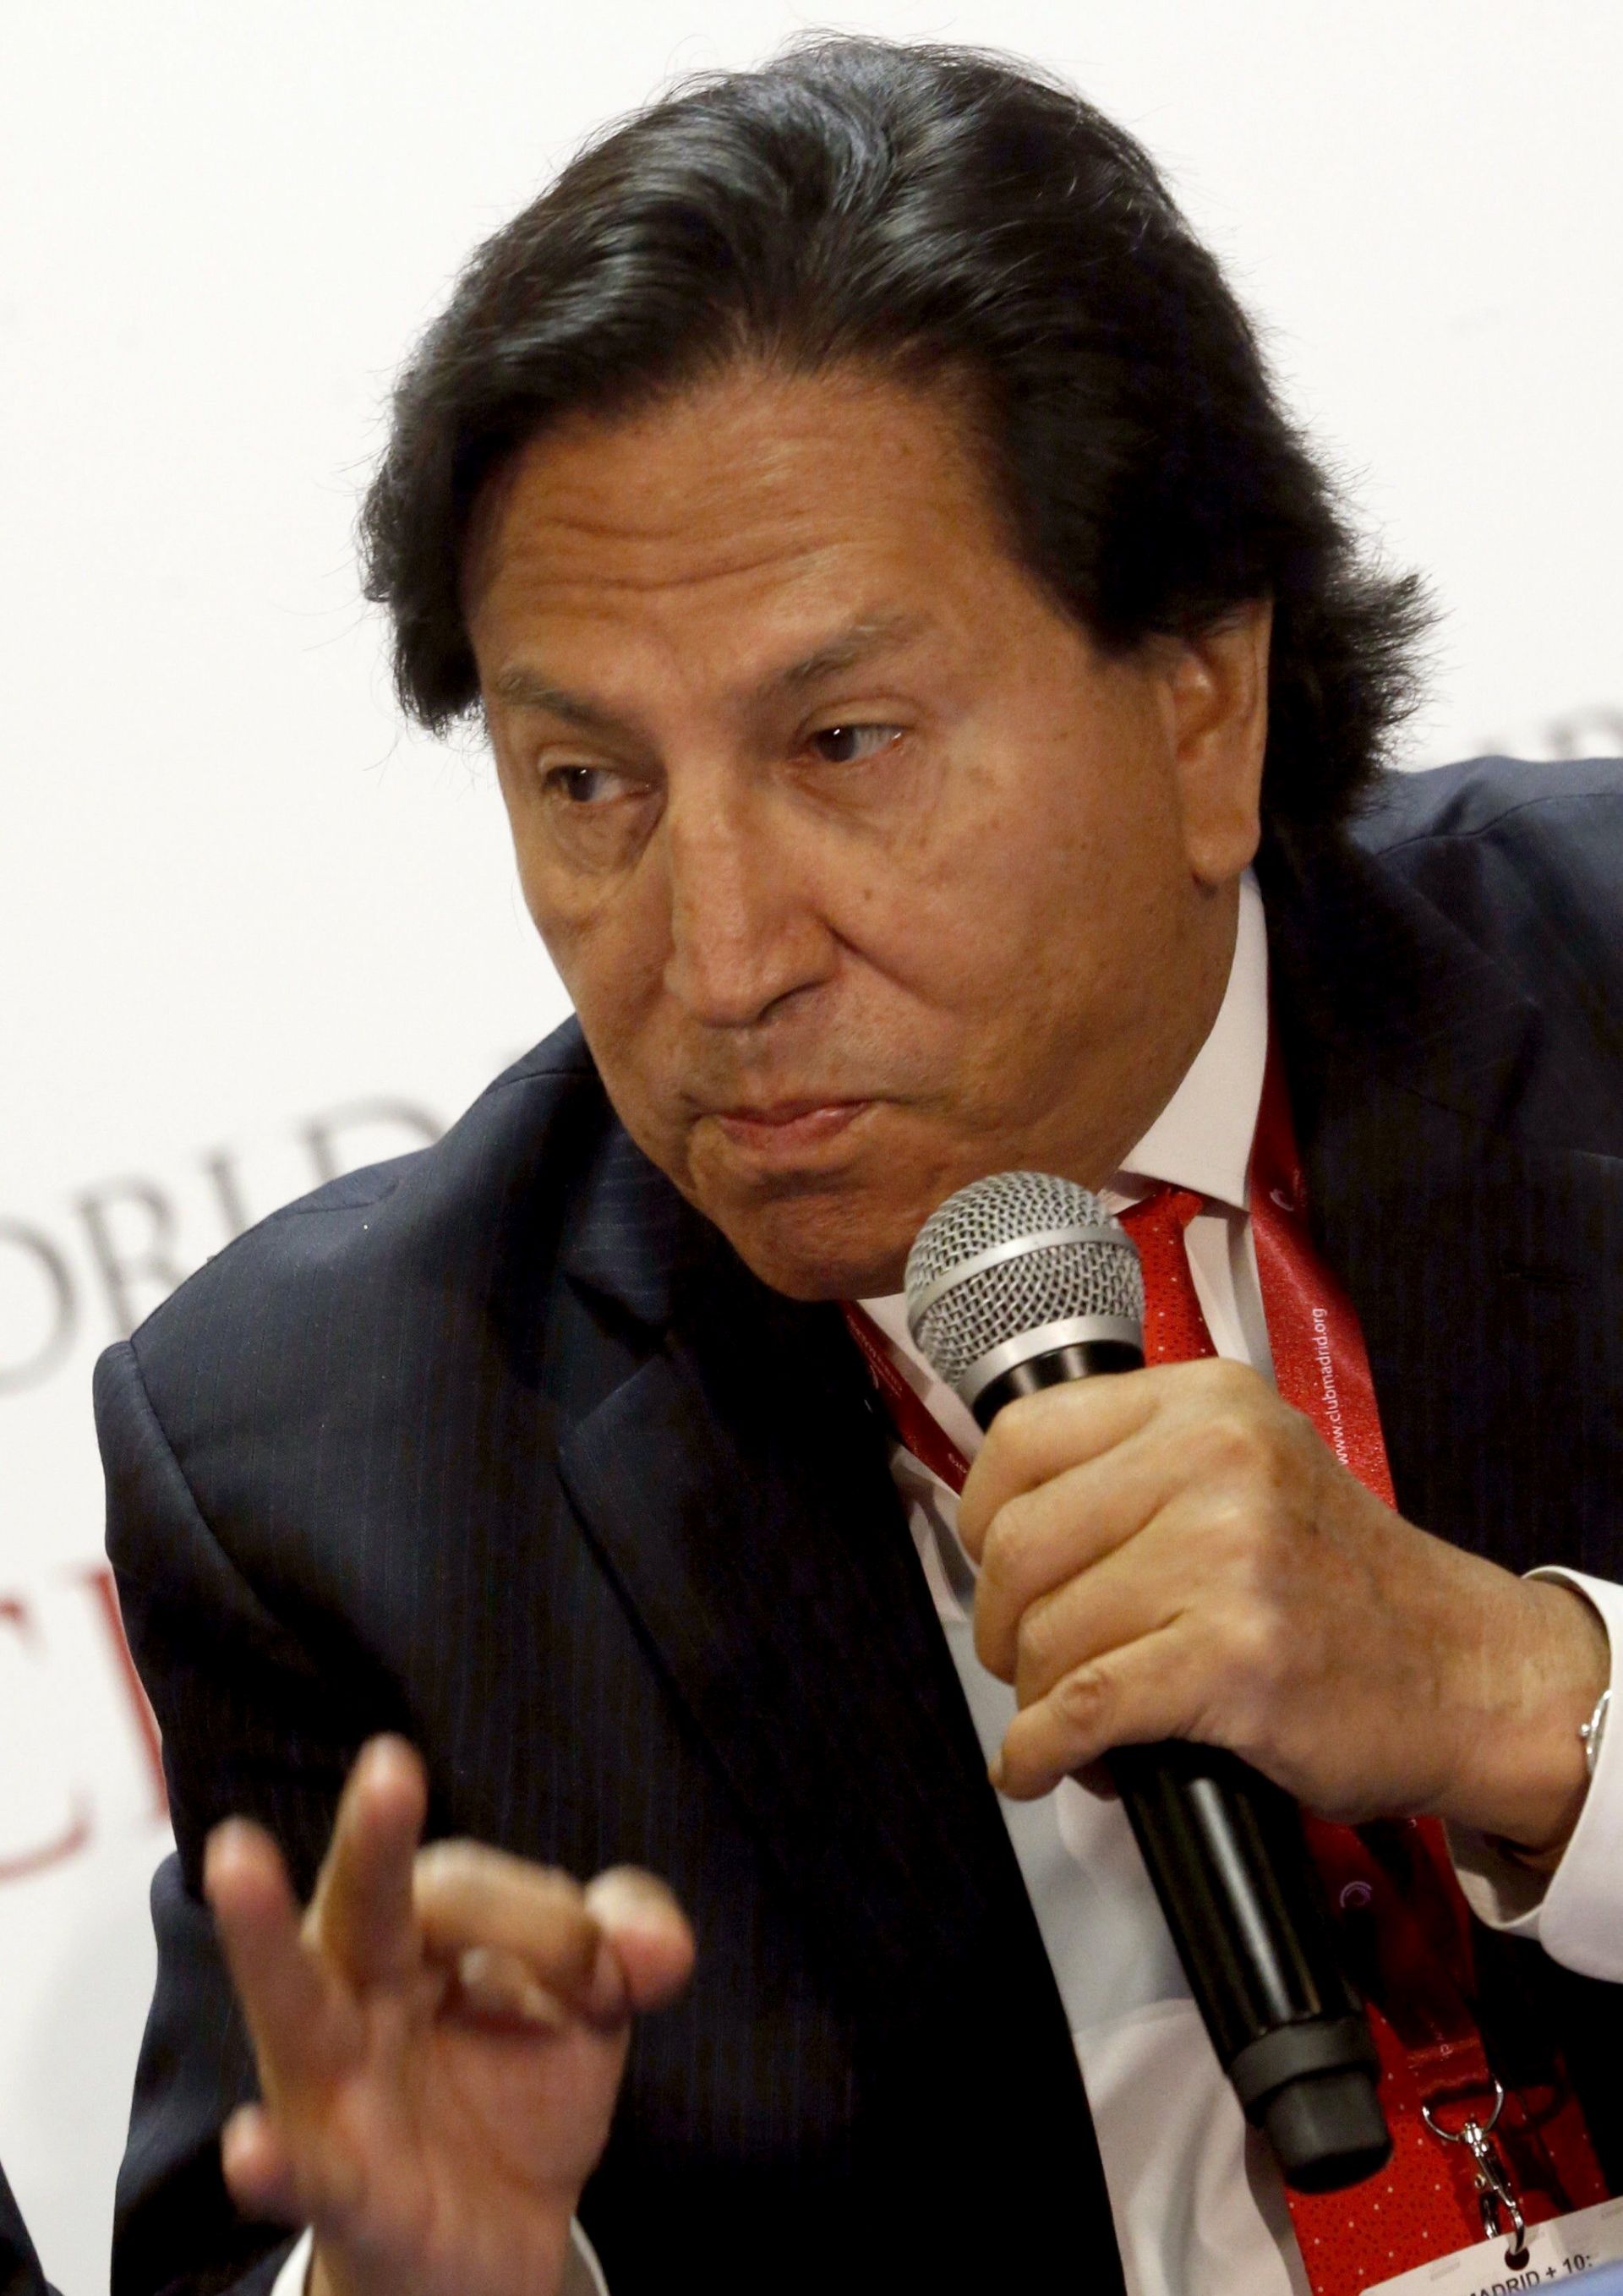 epa05782119 (FILE) A file photograph showing former Peruvian President Alejandro Toledo addressing a press conference after he took part in the presentation of the document 'Global Consensus' in Madrid, Spain, 28 October 2015. Media reports on 10 February 2017 state that a Peruvian judge has ordered the arrest of the country's former president Alejandro Toledo, over allegations that he took 20 million US dollars in bribes, for his alleged links to a collection of bribes from the company Odebrecht. Toledo is presently in France with his wife.  EPA/JAVIER LIZON